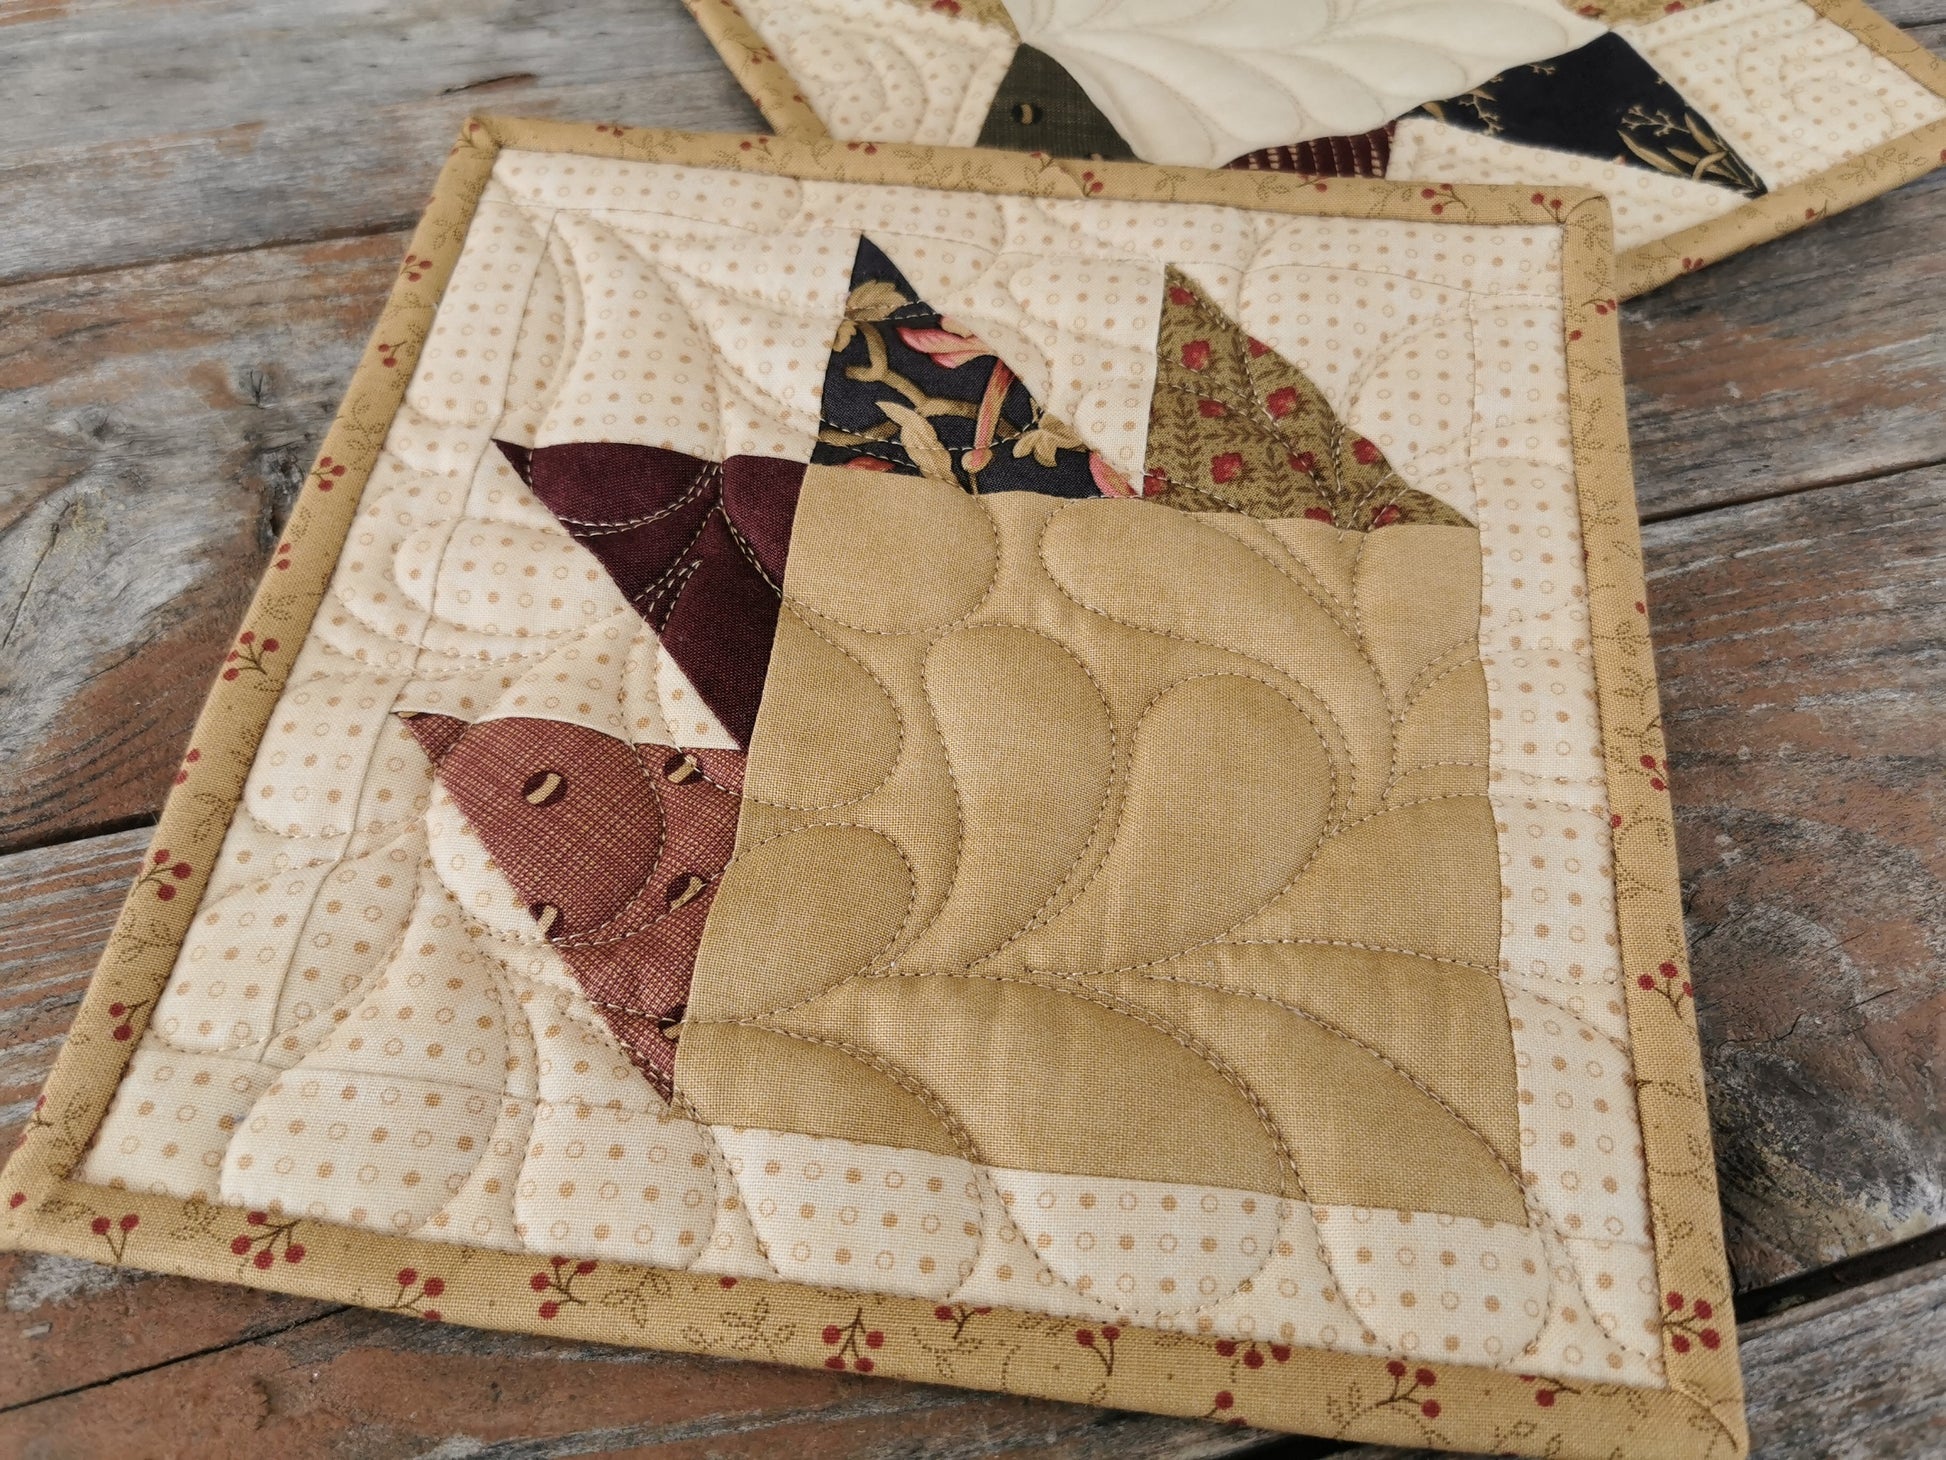 bear paw potholder showing quilting texture